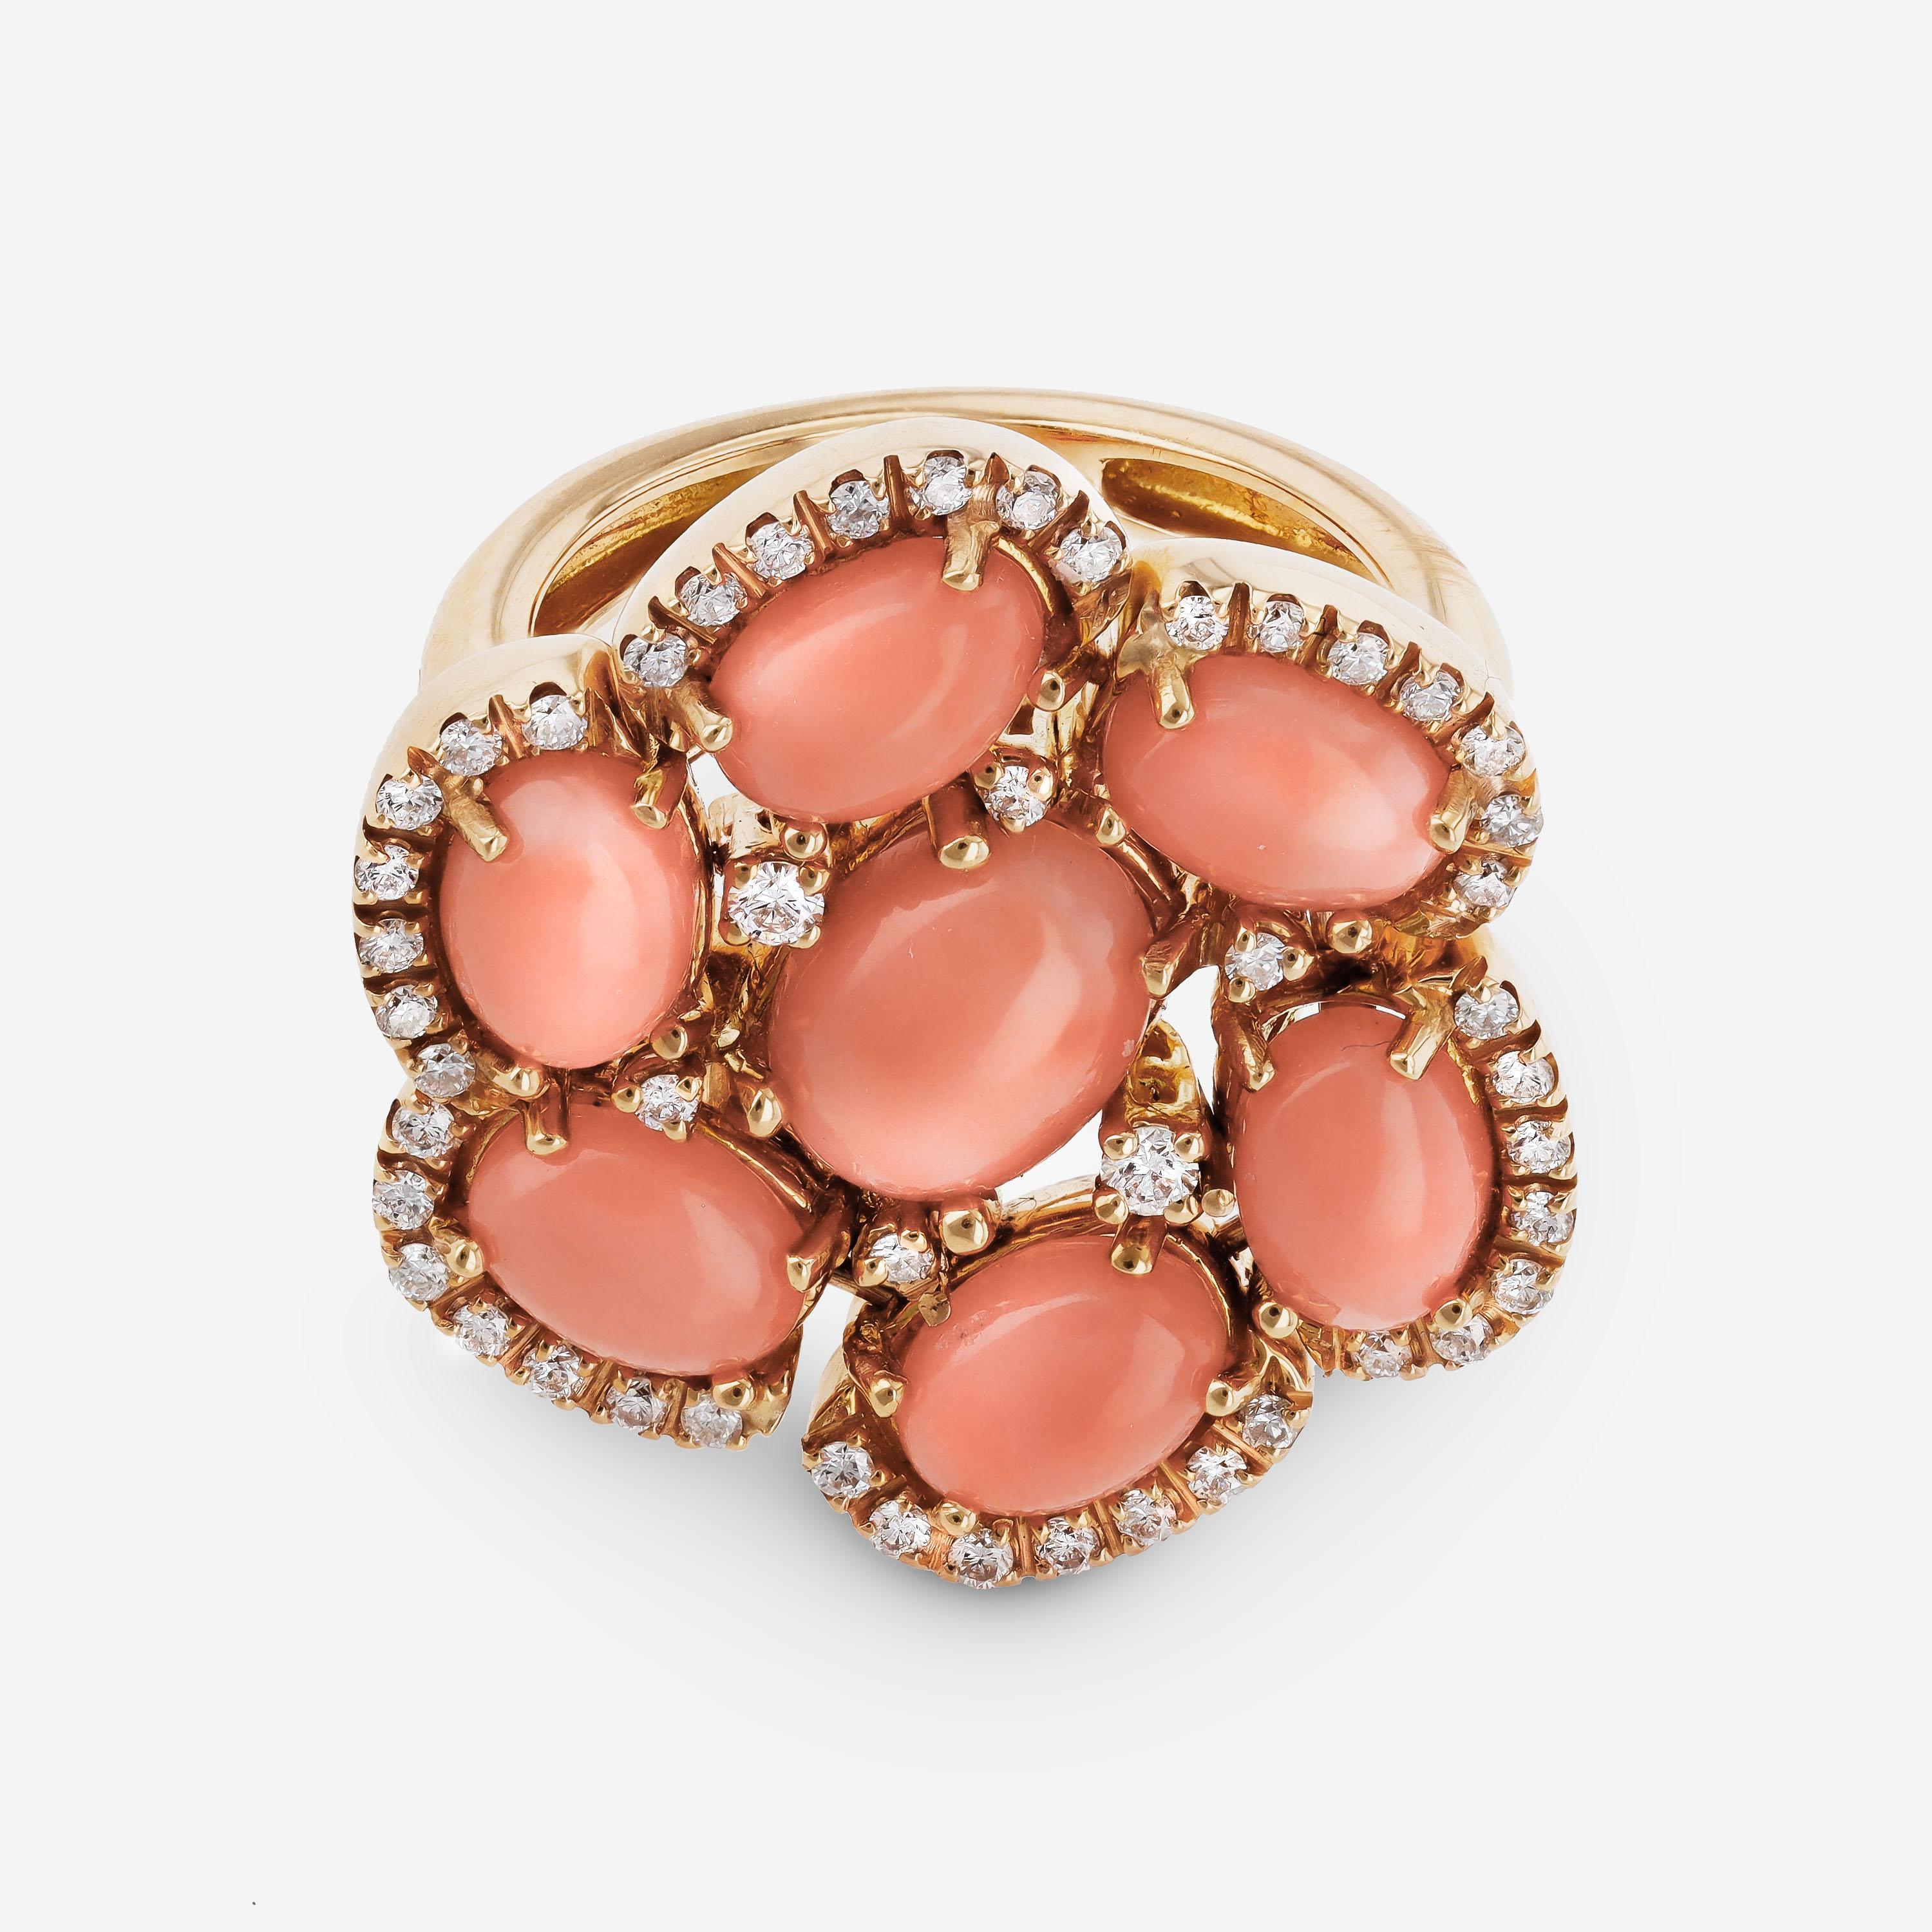 Contemporary Zydo 18K Yellow Gold Diamond and Coral Petals Ring Sz 7.5 For Sale